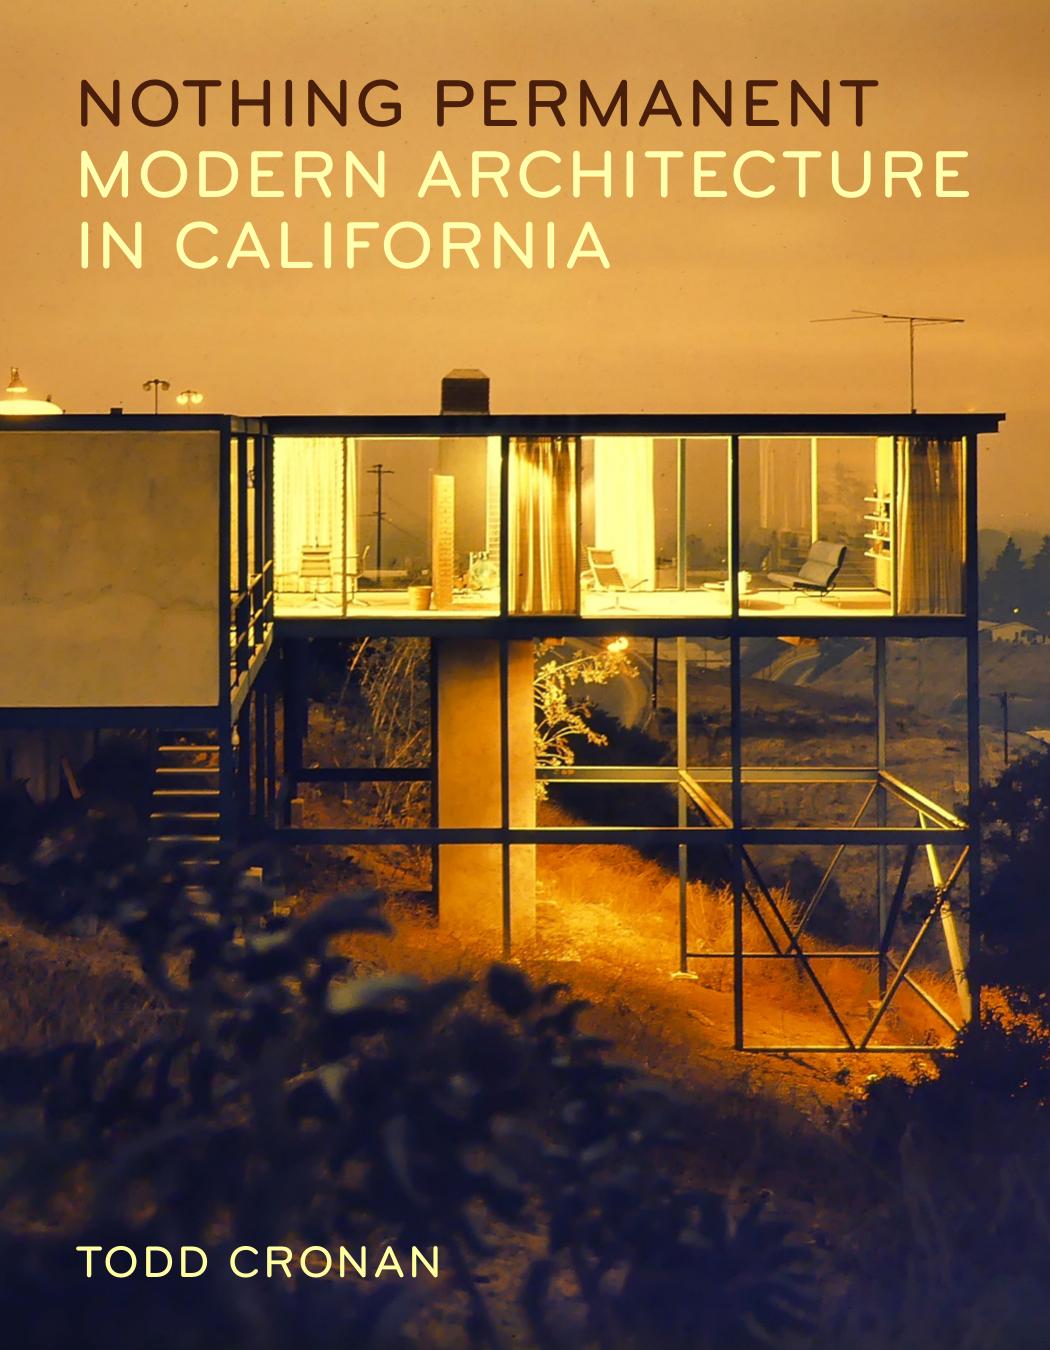 Nothing Permanent: Modern Architecture in California by Todd Cronan